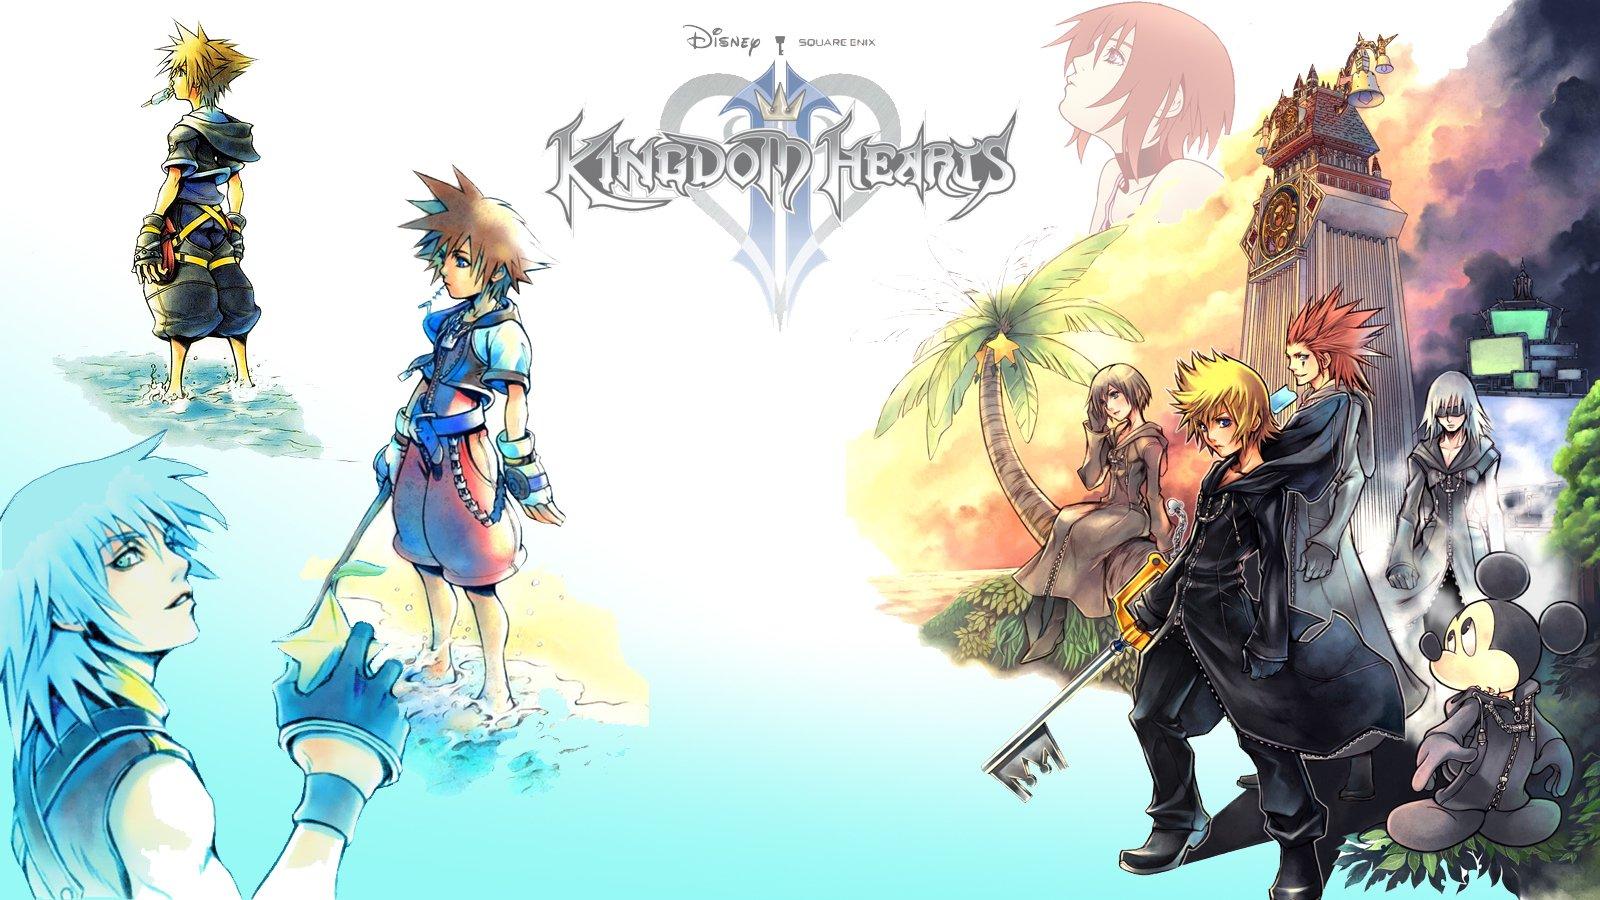 Kingdom Hearts HD Wallpaper and Background Image